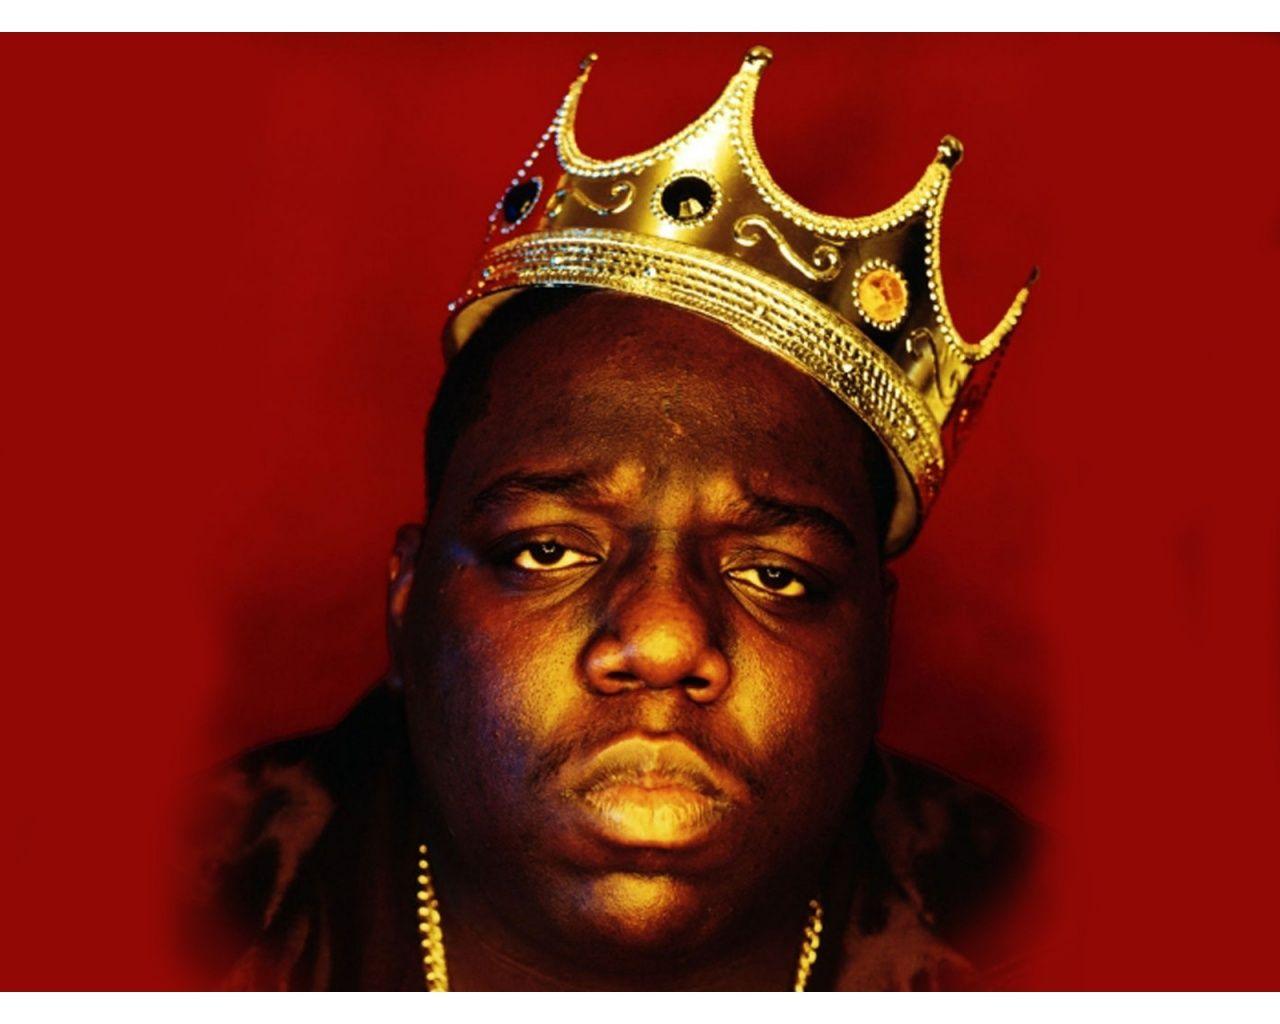 The Notorious BIG Wallpapers